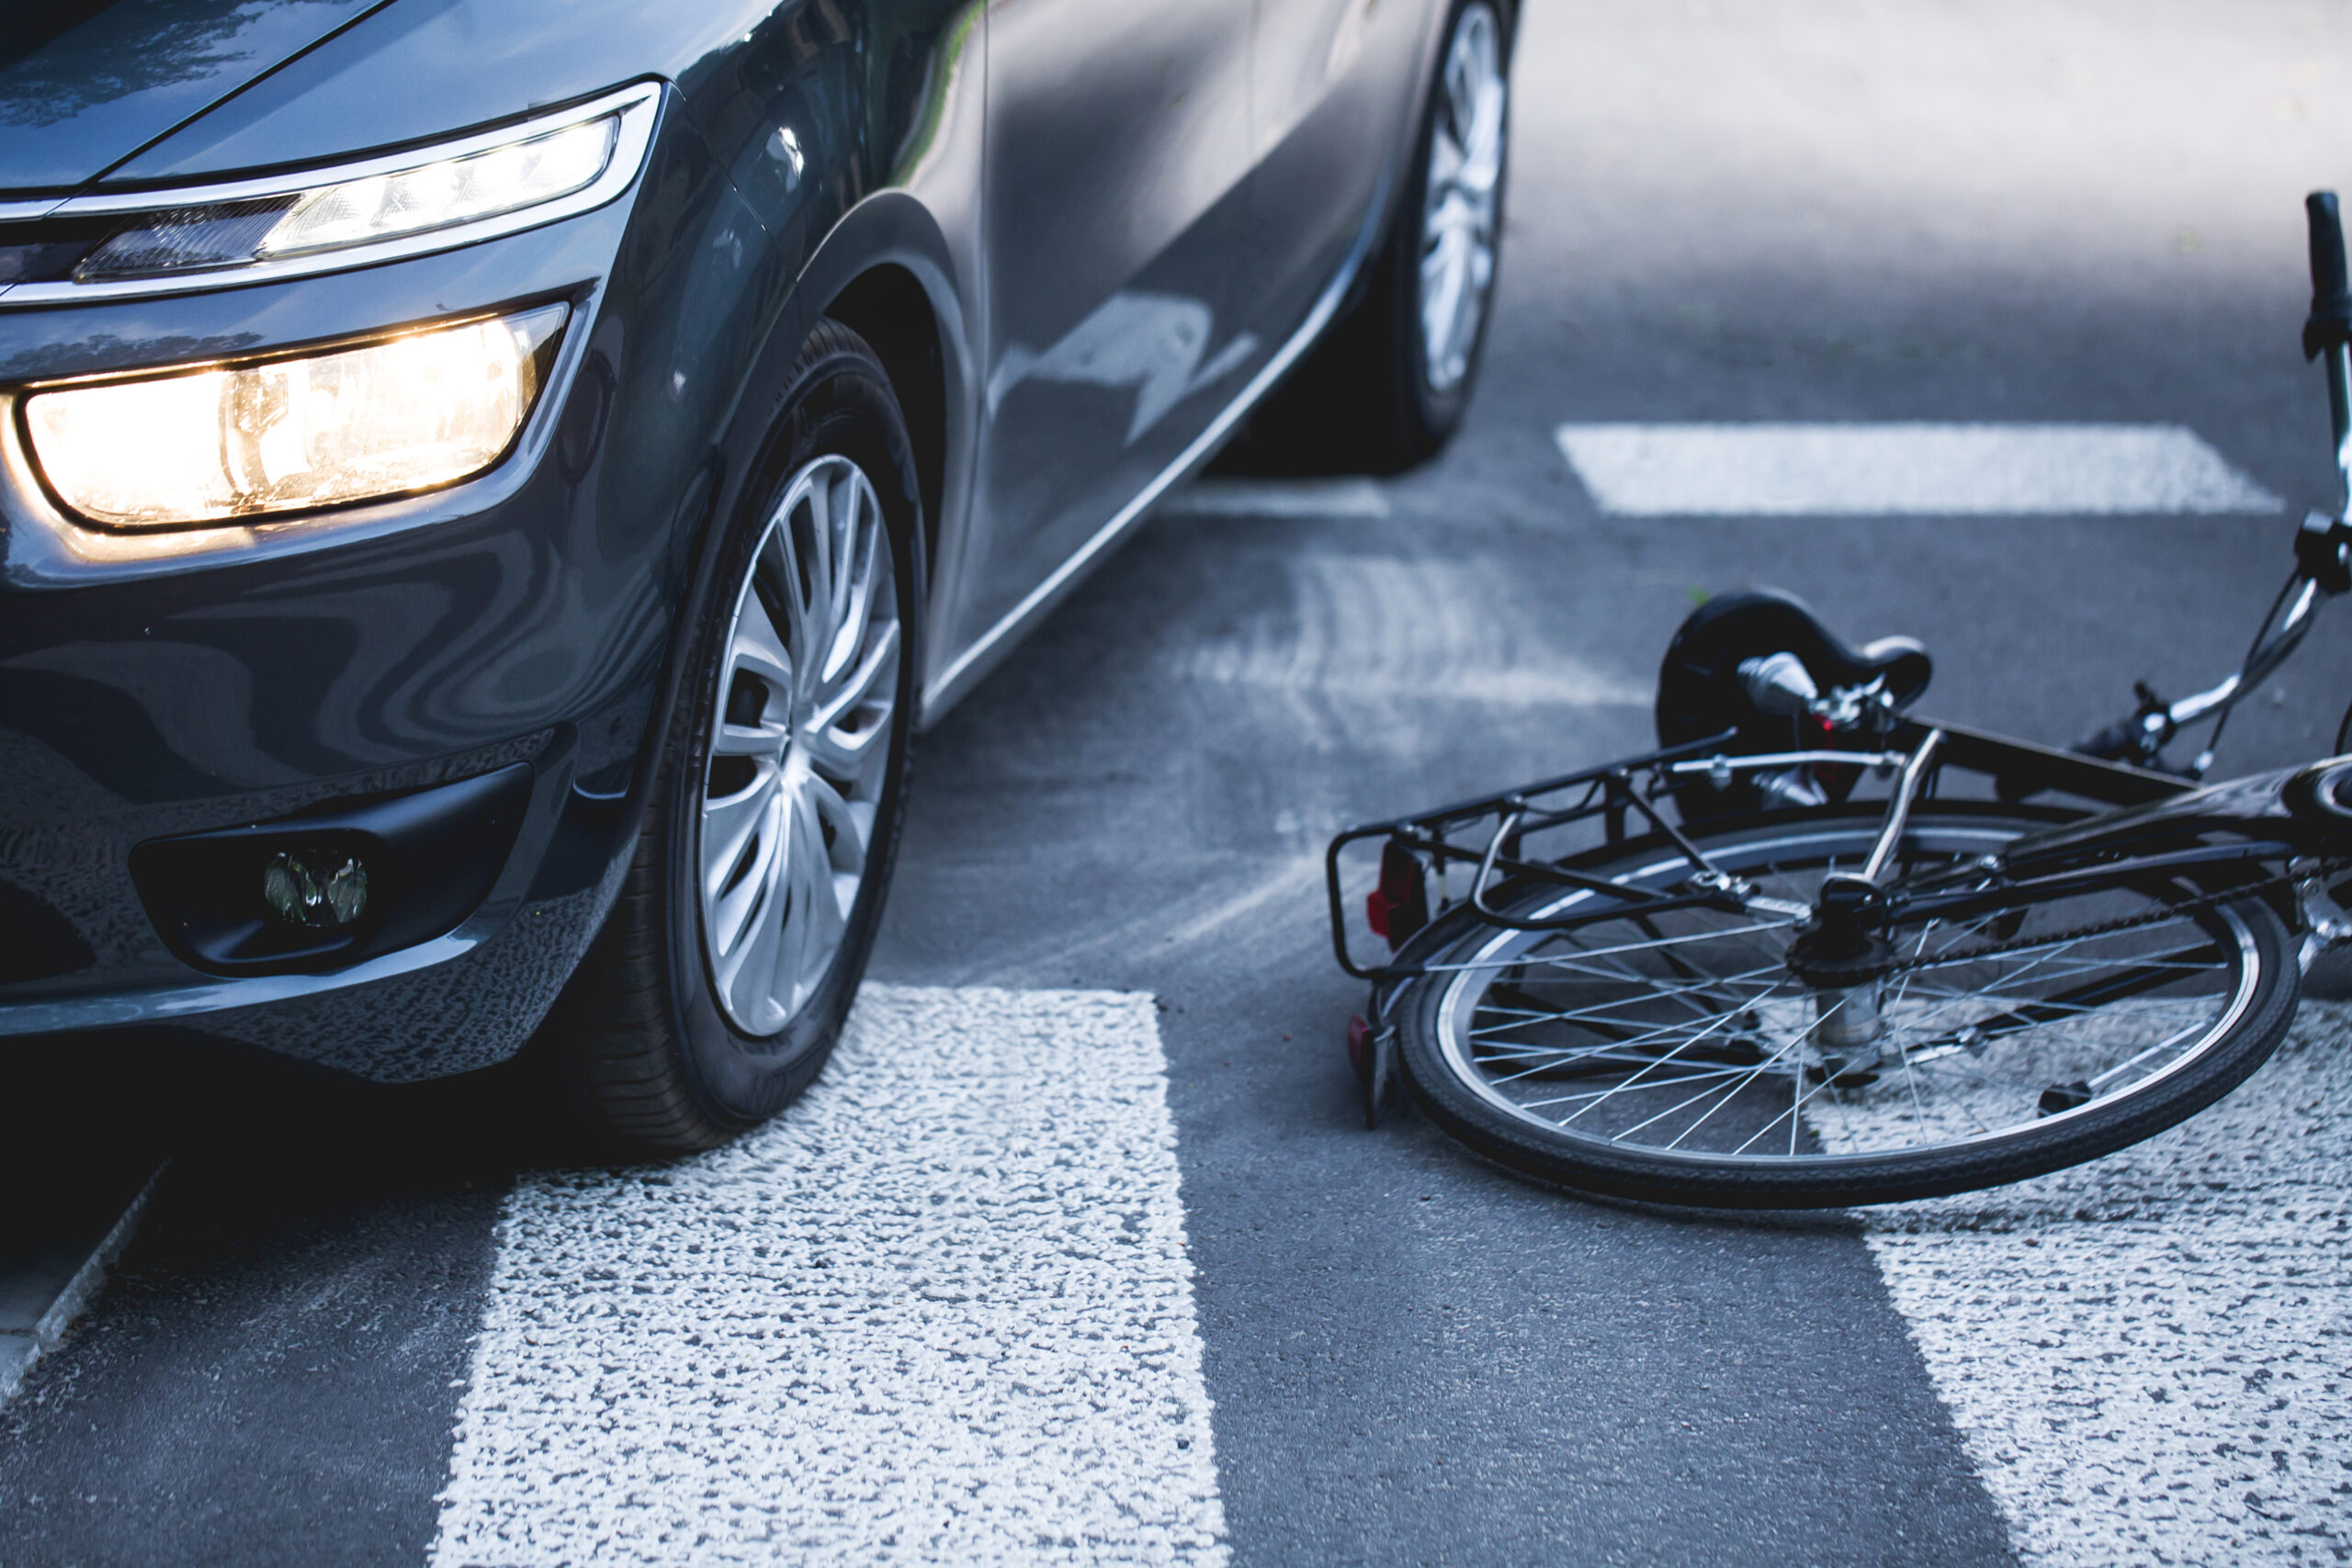 Bicycle Accident Injuries in Georgia Common Types and Severity